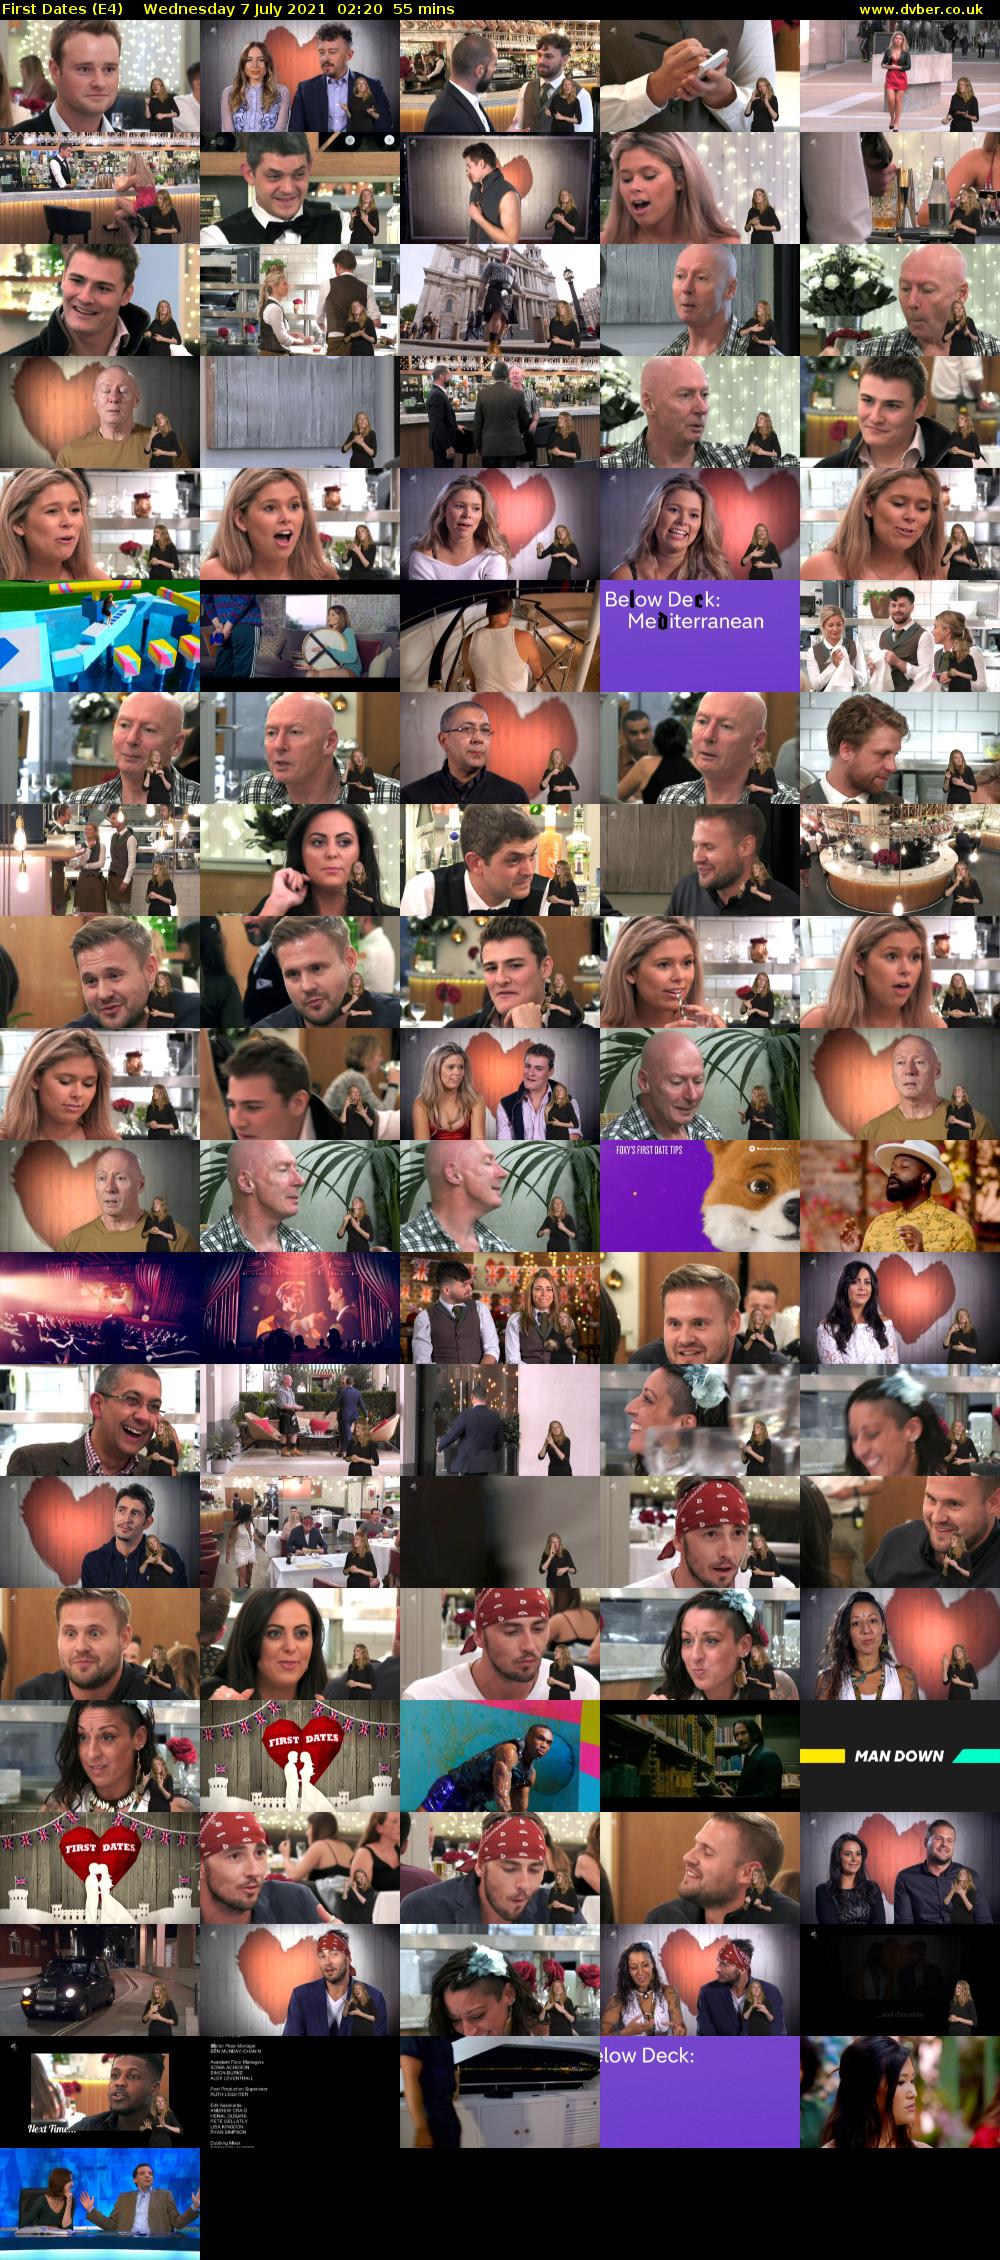 First Dates (E4) Wednesday 7 July 2021 02:20 - 03:15